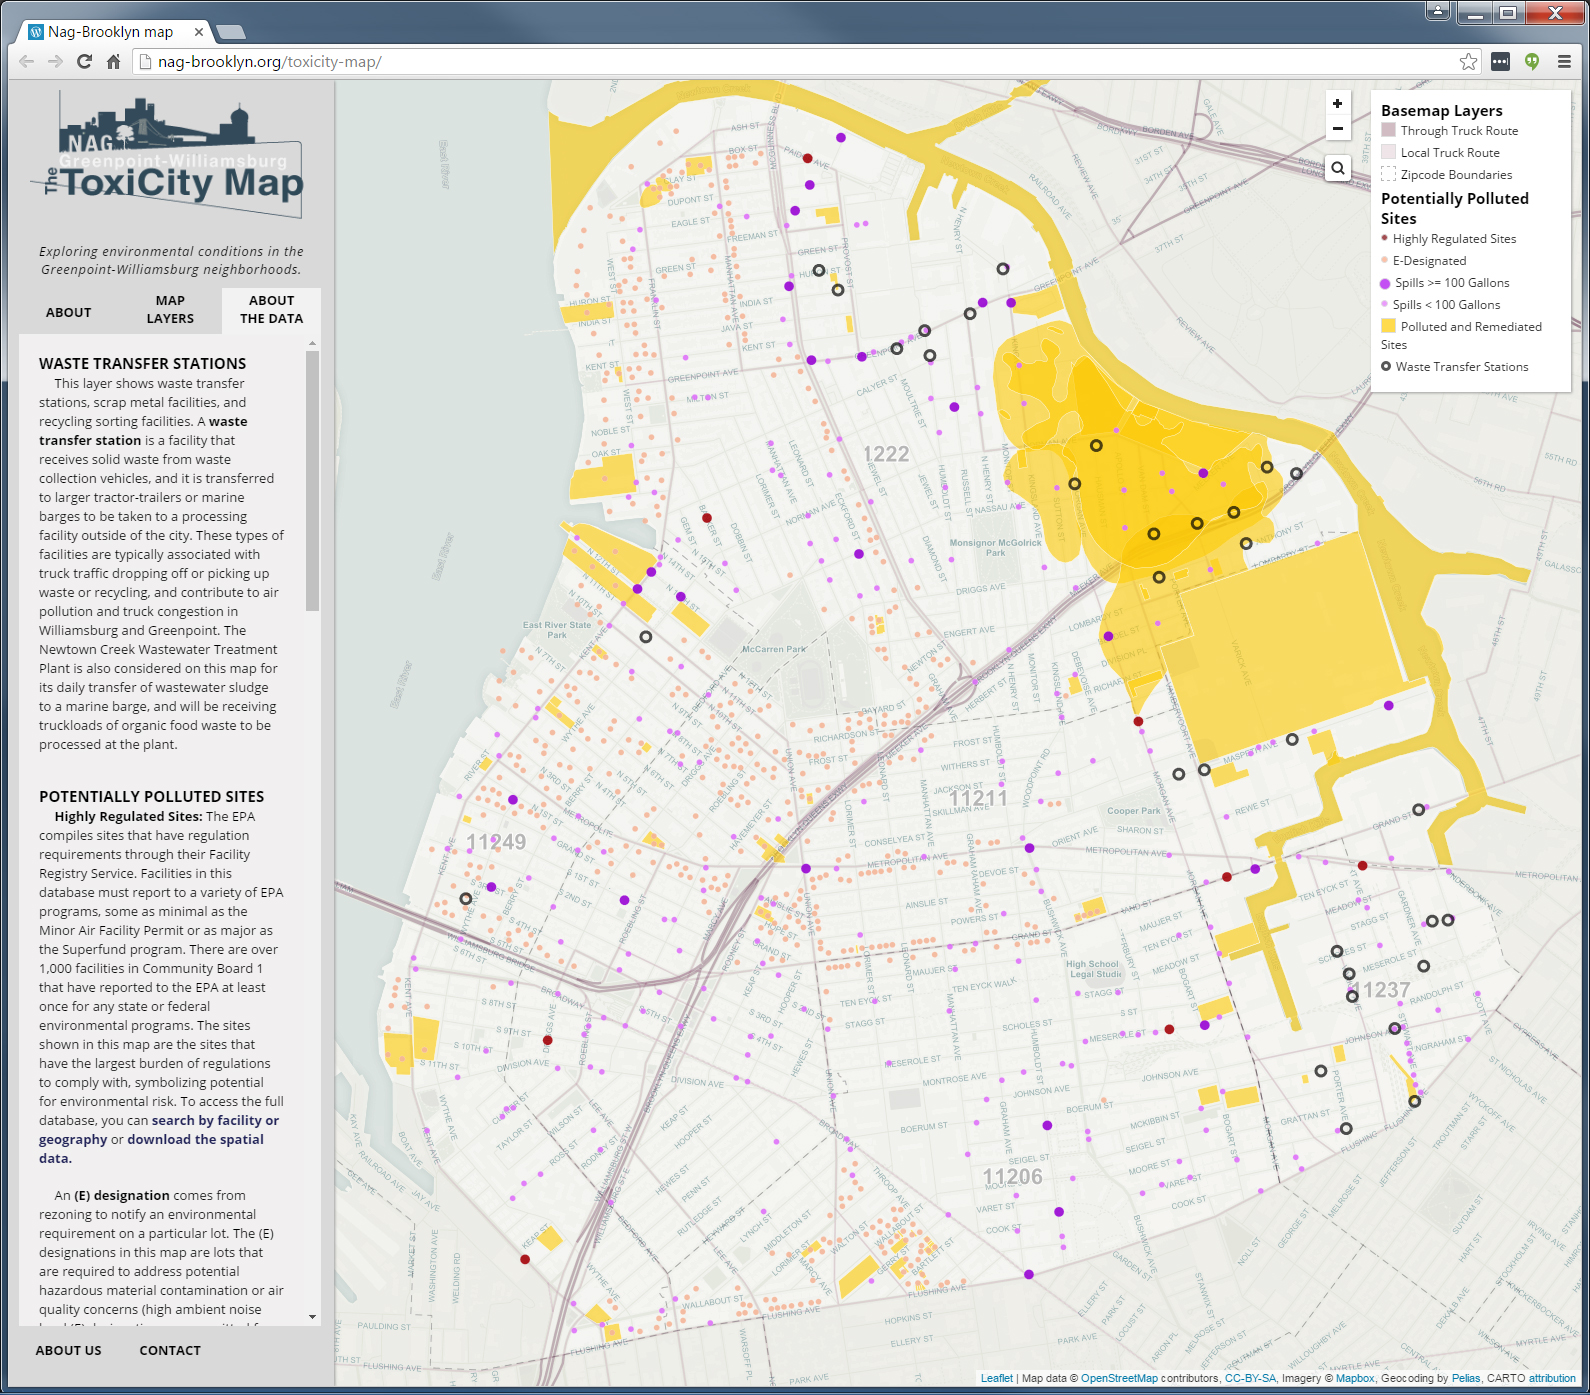 SAVI compiled information from federal, state, and city sources under several different environmental programs in building ToxiCity interactive web application. The application is built with several open source components.